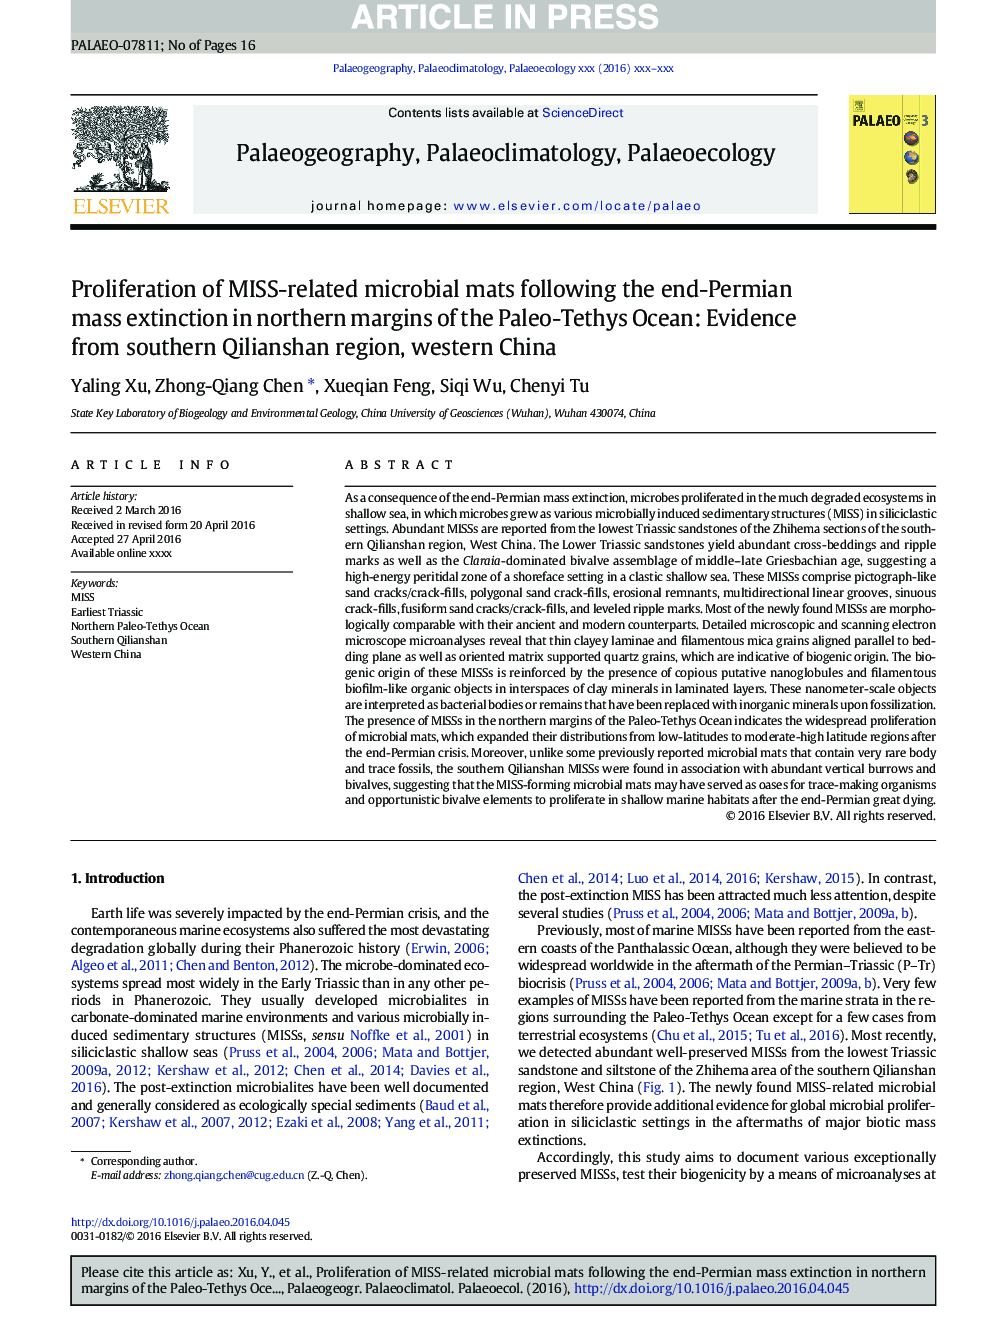 Proliferation of MISS-related microbial mats following the end-Permian mass extinction in the northern Paleo-Tethys: Evidence from southern Qilianshan region, western China